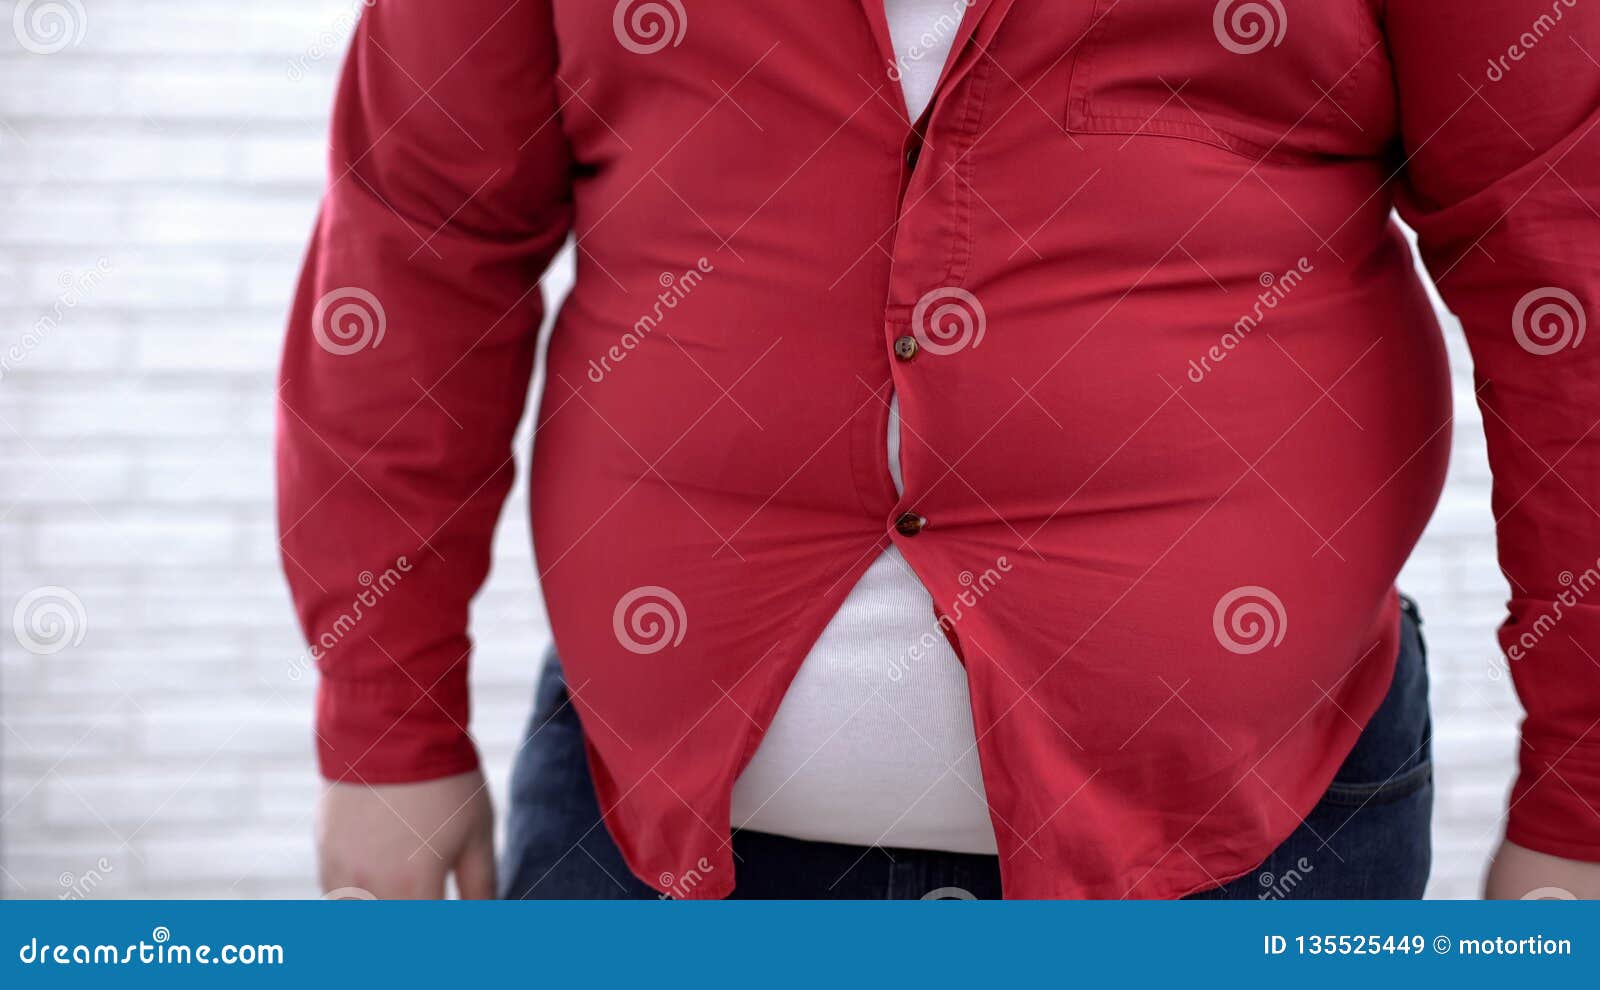 obese man wearing tight red shirt, oversize clothing problem, insecurities